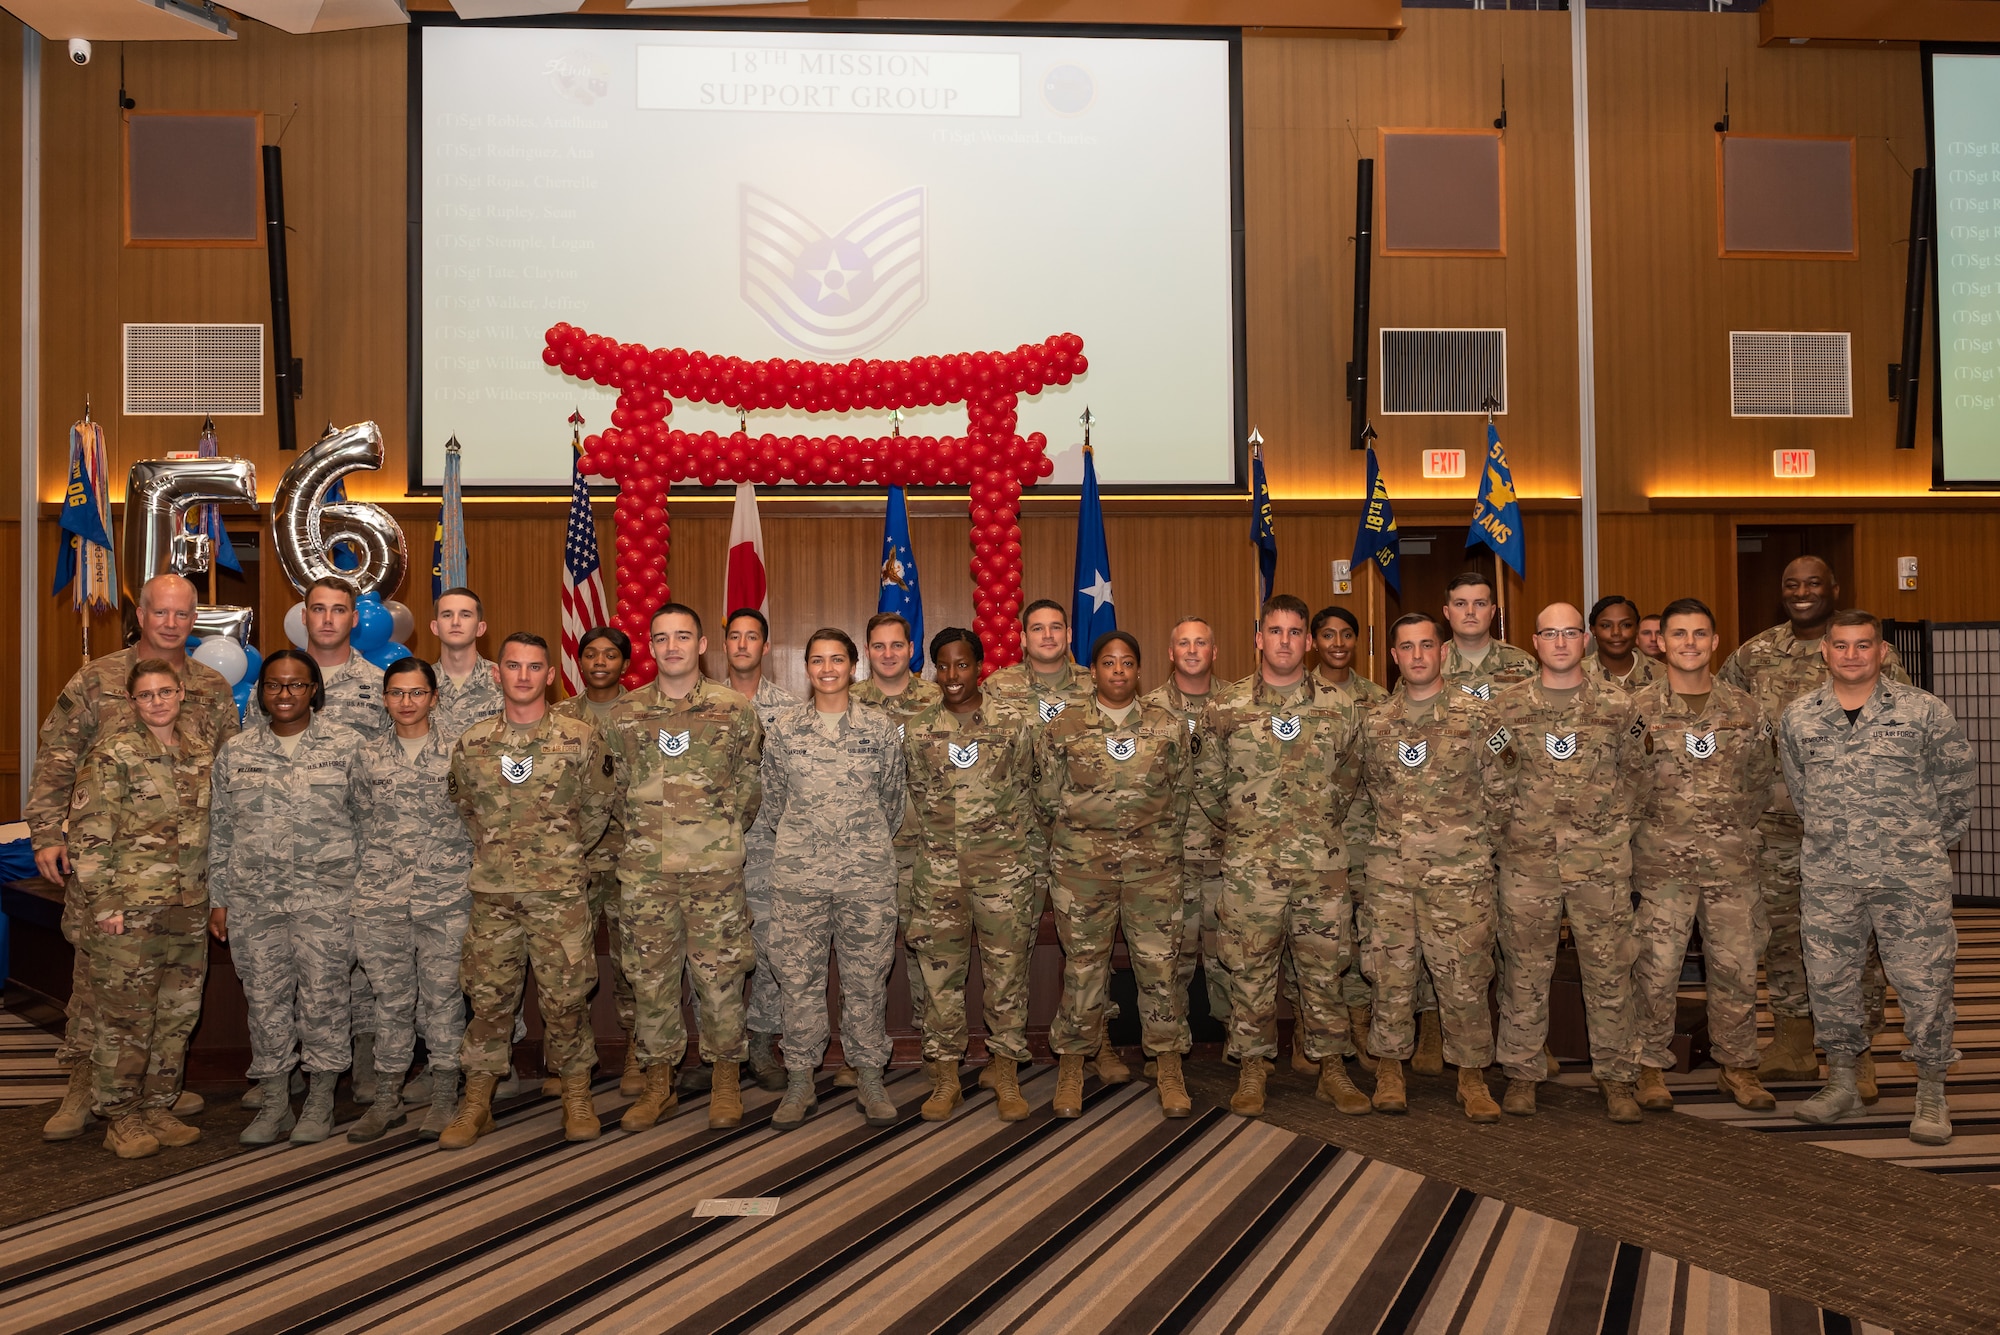 More than 250 staff sergeants from around the 18th Wing celebrate their promotion to technical sergeant on Kadena Air Base, July 19, 2019. The promotees are charged with being their organizations’ technical experts, and must continuously strive to further their development as technicians, supervisors and leaders through on- and off-duty professional development opportunities. They are responsible for their subordinates’ development and the effective accomplishment of all assigned tasks. They must ensure proper and effective use of all resources under their control to ensure the mission is effectively and efficiently accomplished. (U.S. Air Force photo by Airman 1st Class Matthew Seefeldt)